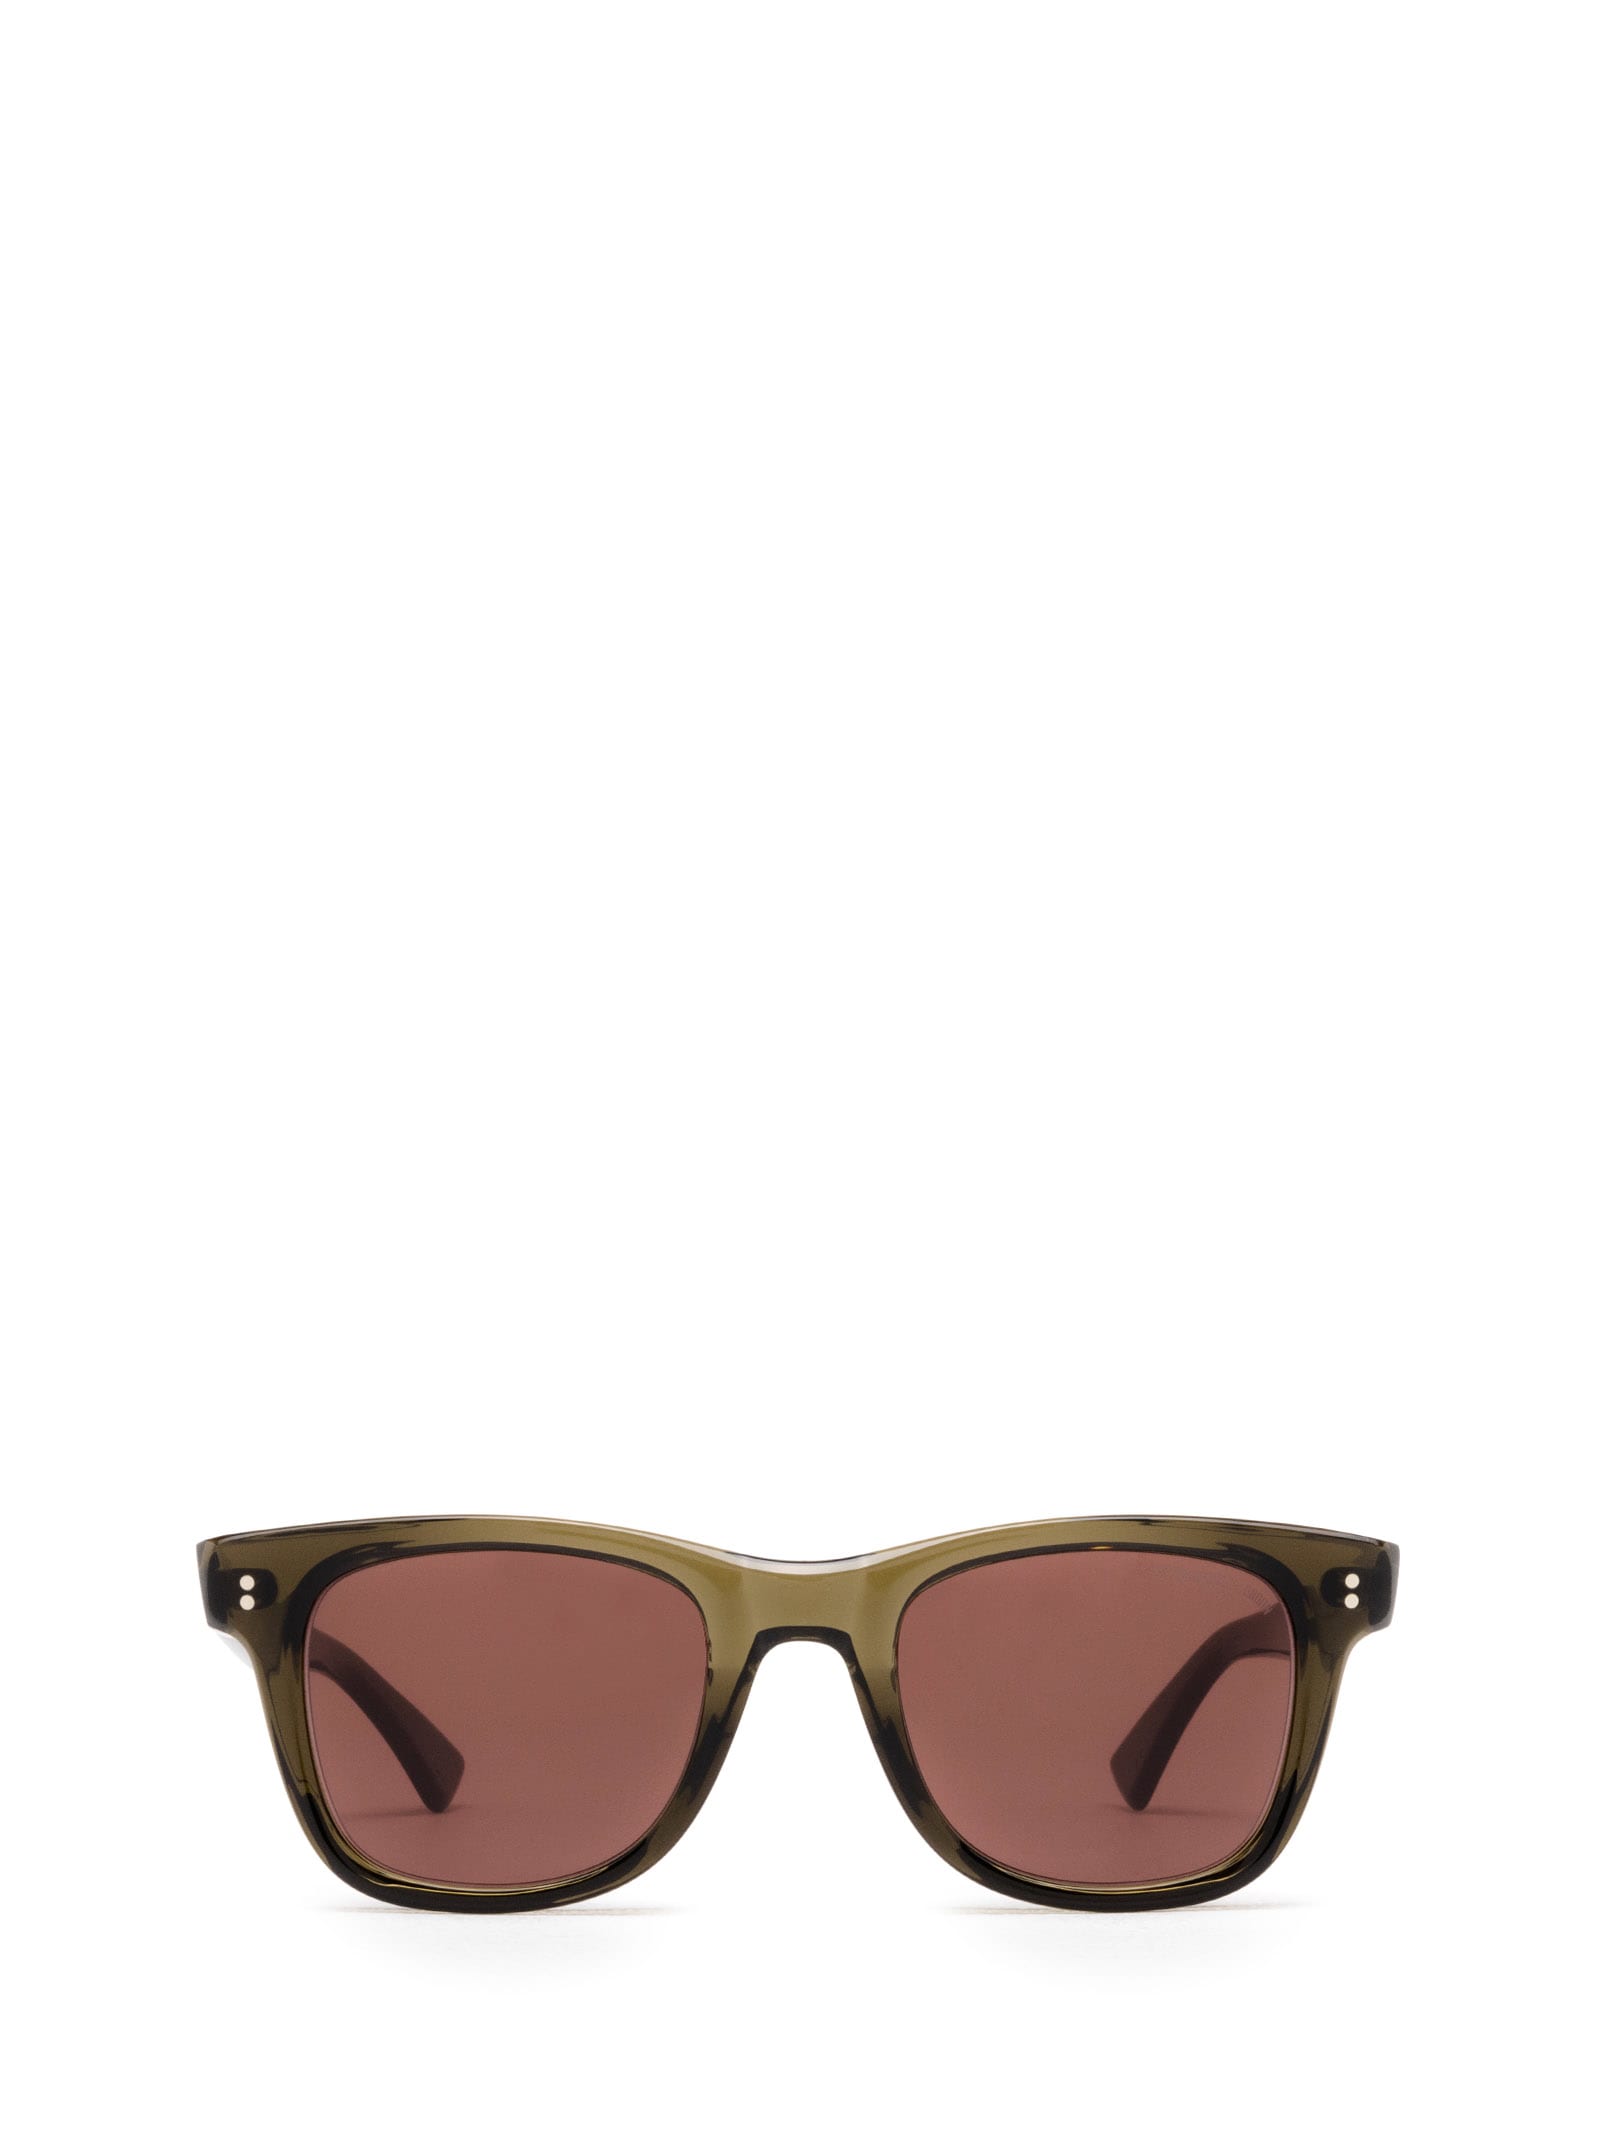 Cutler and Gross 9101 Sun Olive Sunglasses